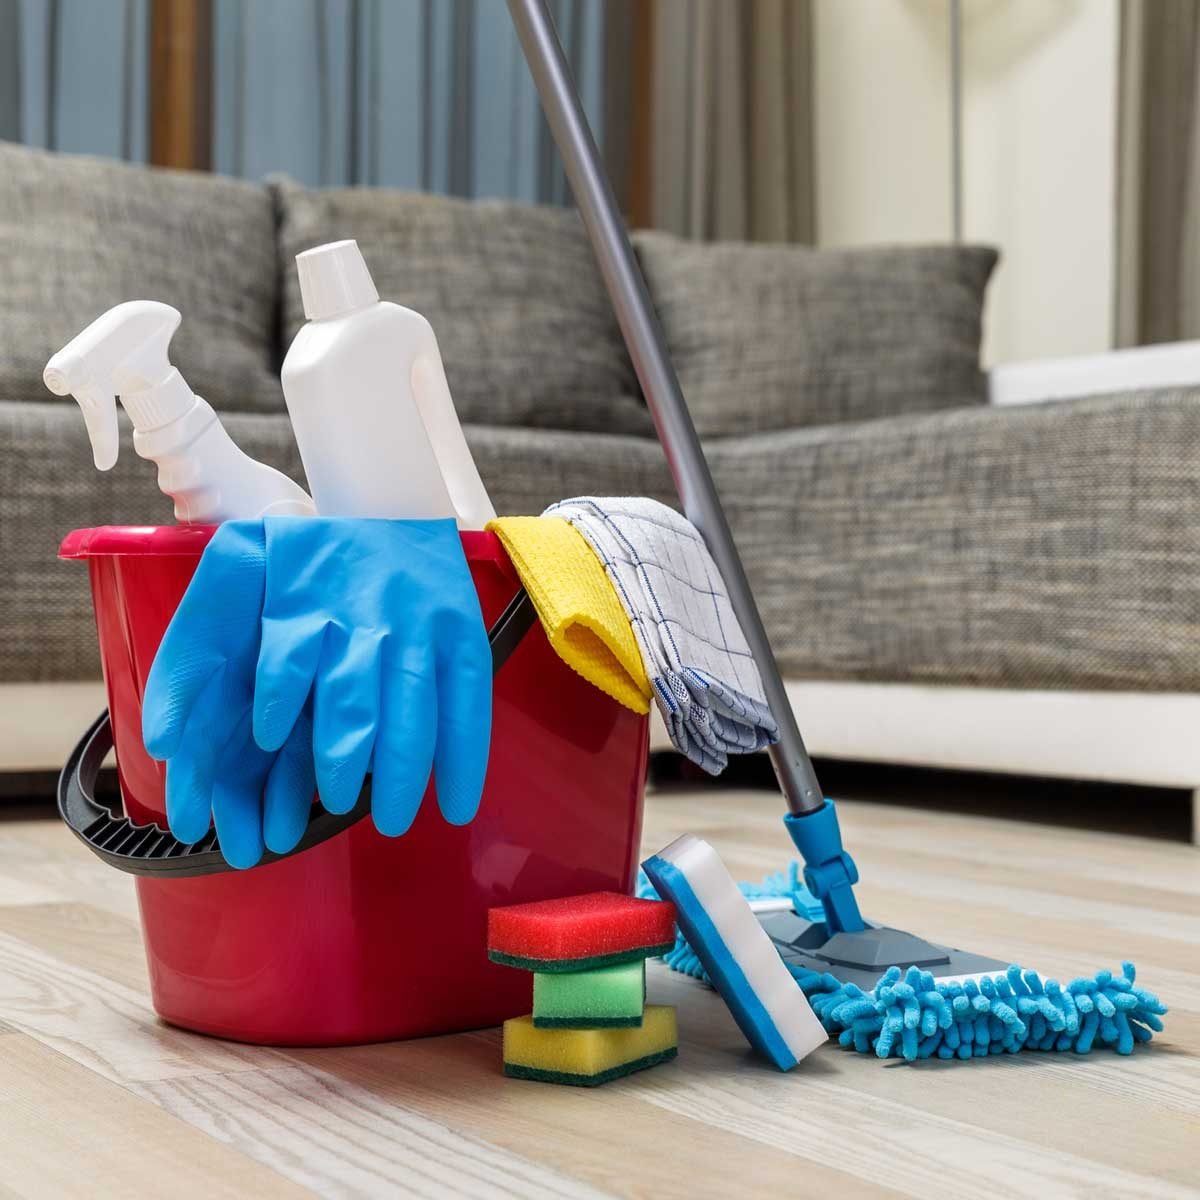 https://www.familyhandyman.com/wp-content/uploads/2021/02/cleaning-supplies-GettyImages-654153664.jpg